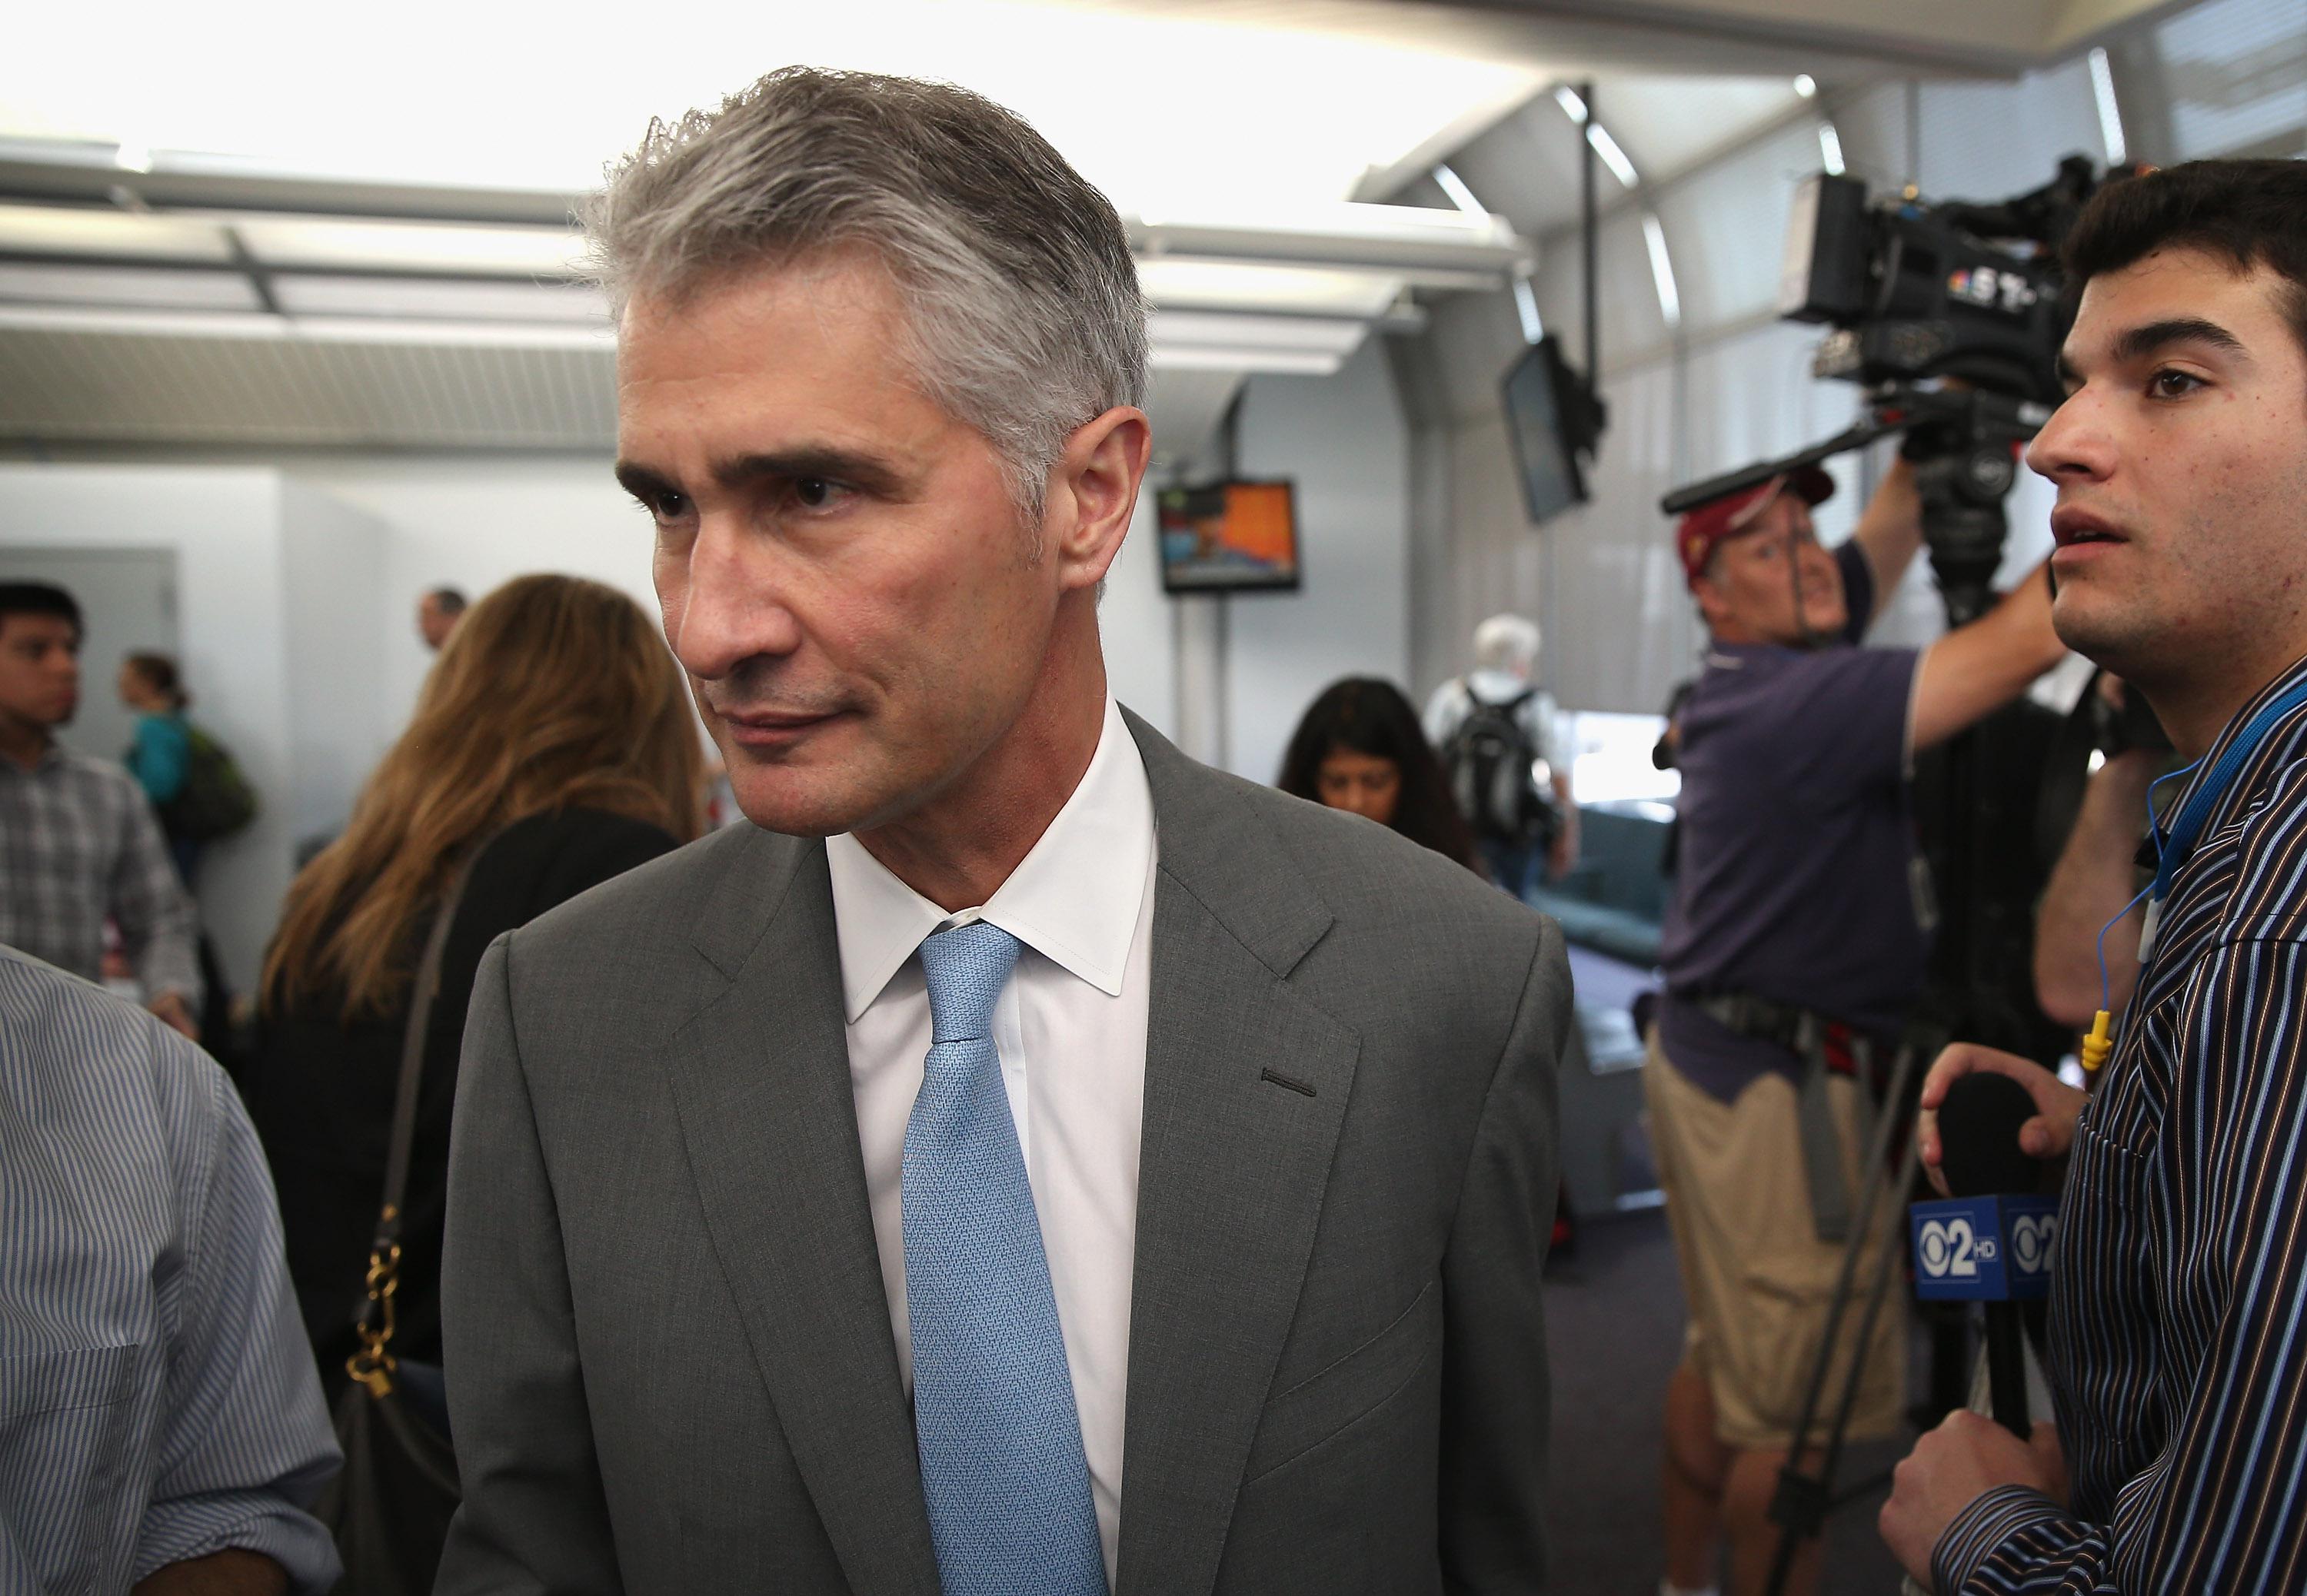 United Airlines CEO Jeff Smisek leaves the gate after stepping off a United Boeing 787 Dreamliner flight from Houston at O'Hare International Airport on May 20, 2013, in Chicago.